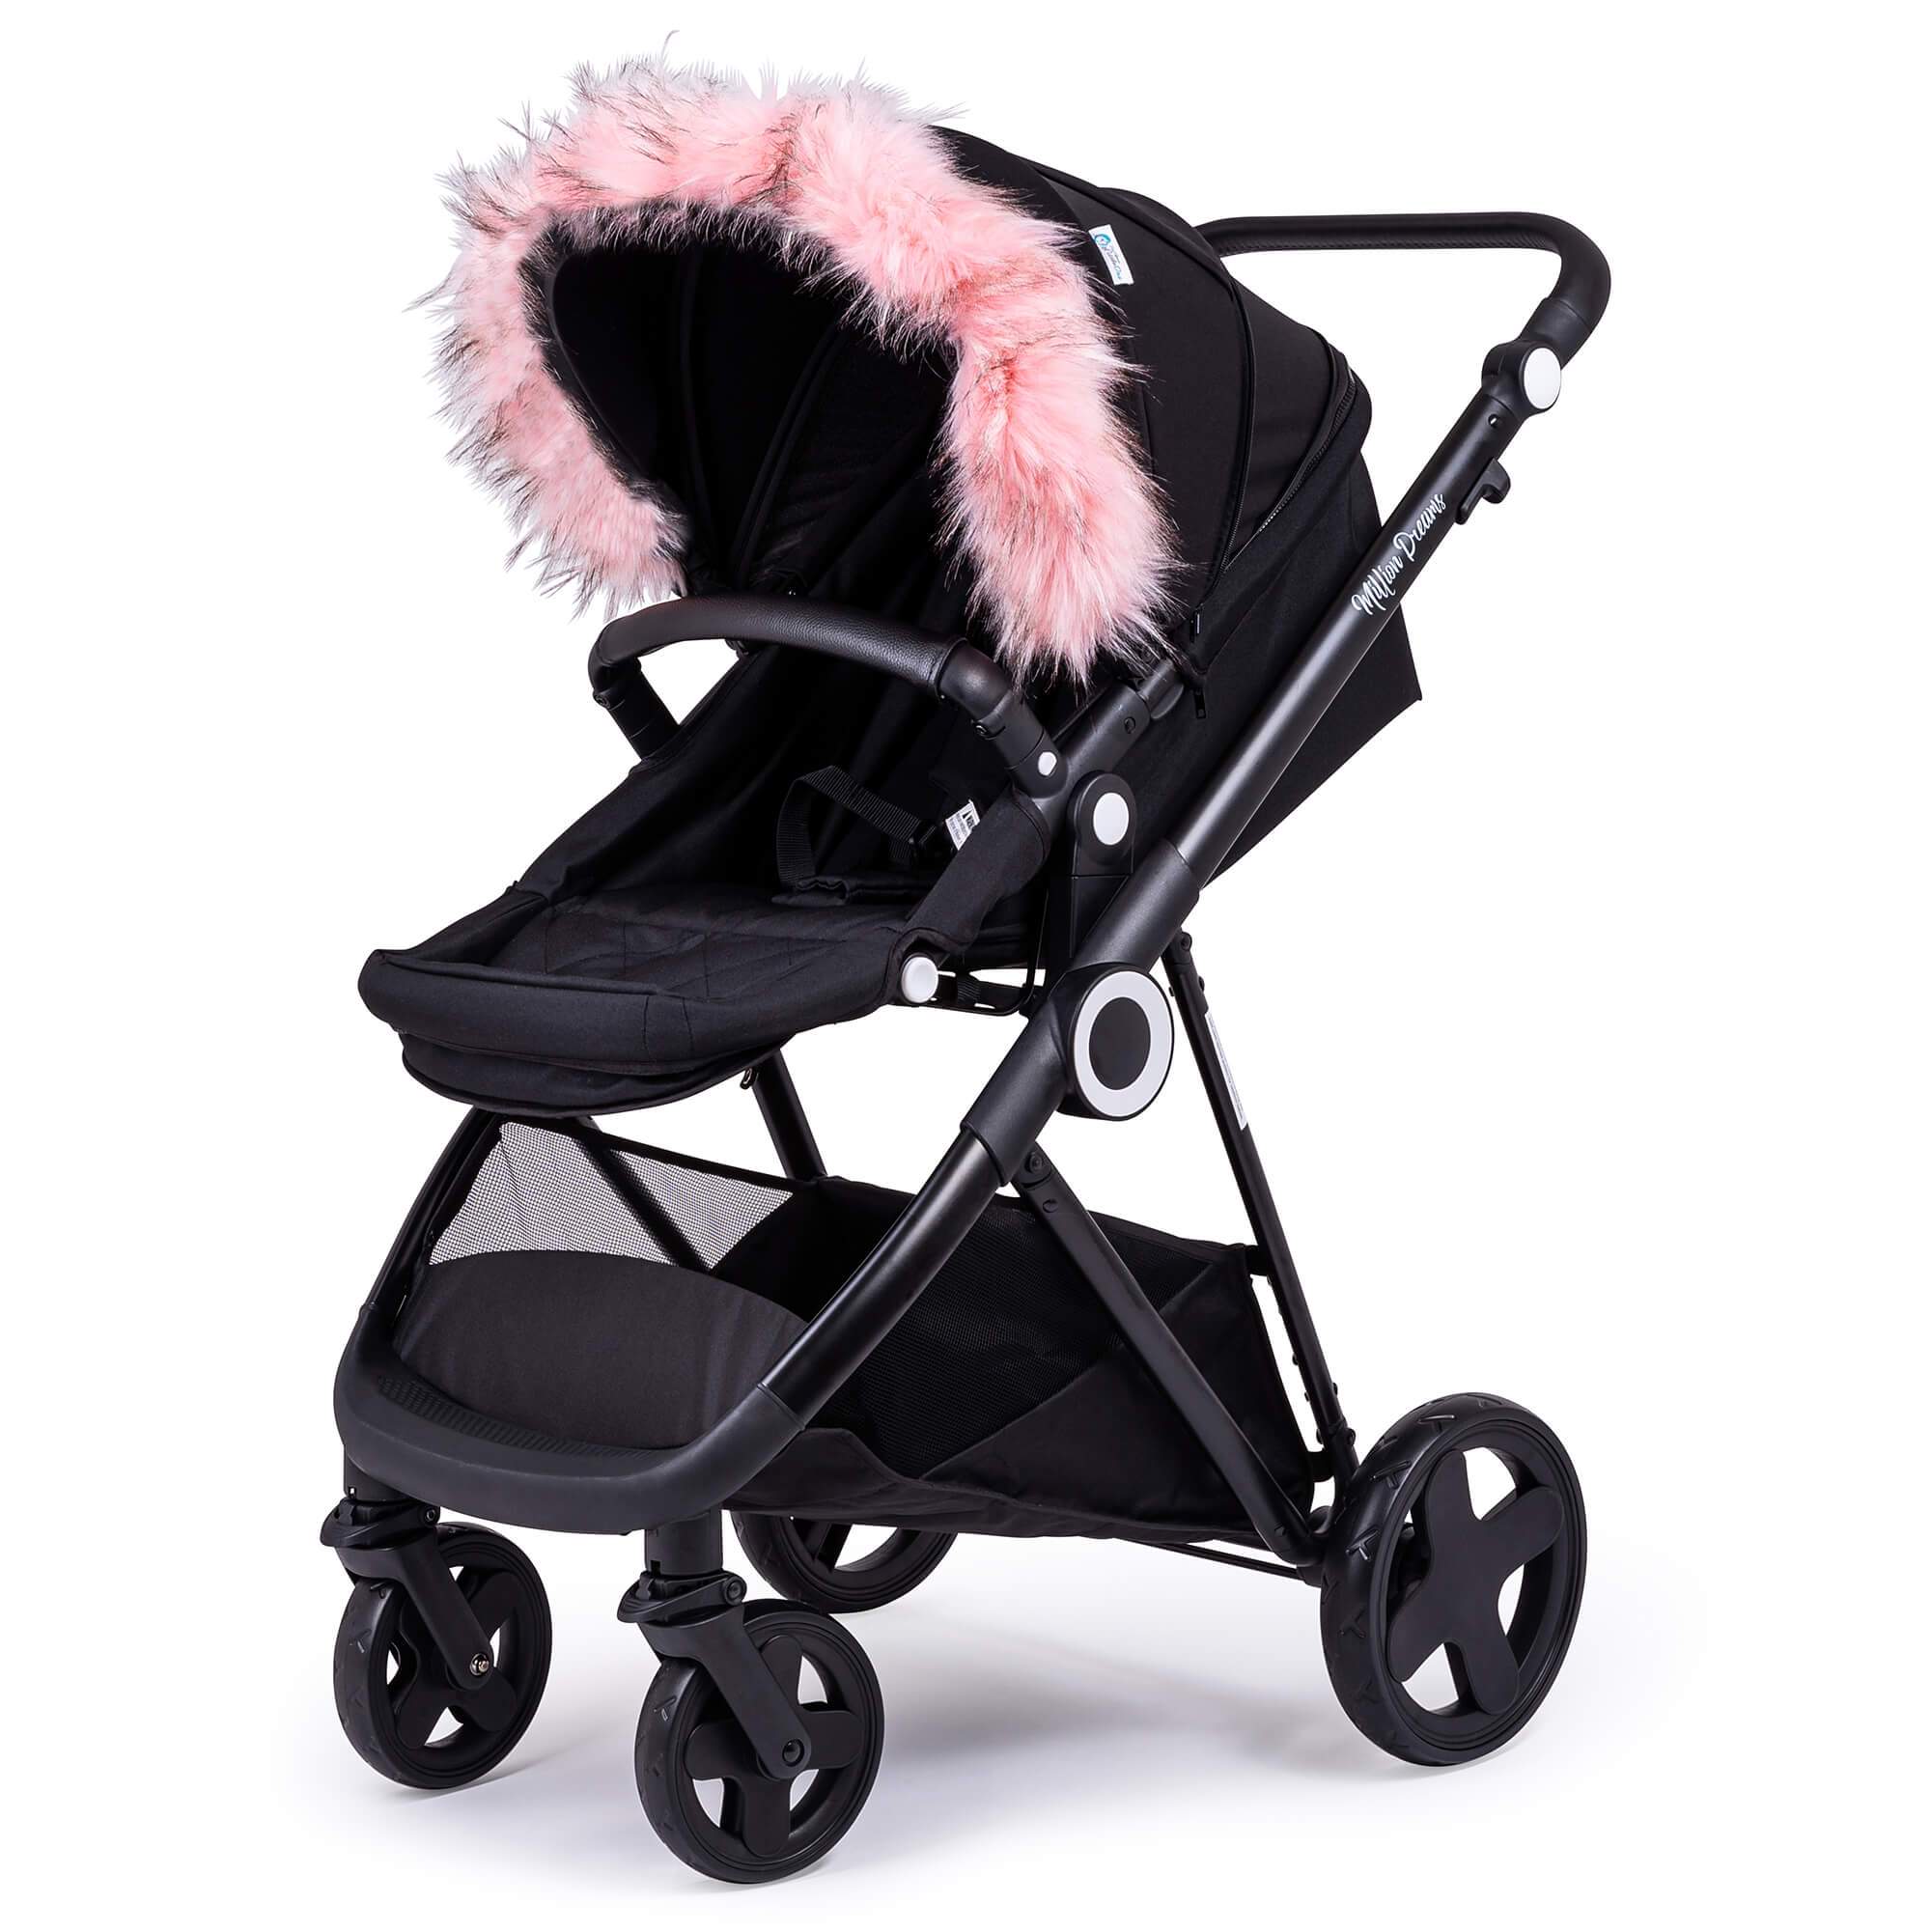 Pram Fur Hood Trim Attachment for Pushchair Compatible with Hesba - Light Pink / Fits All Models | For Your Little One